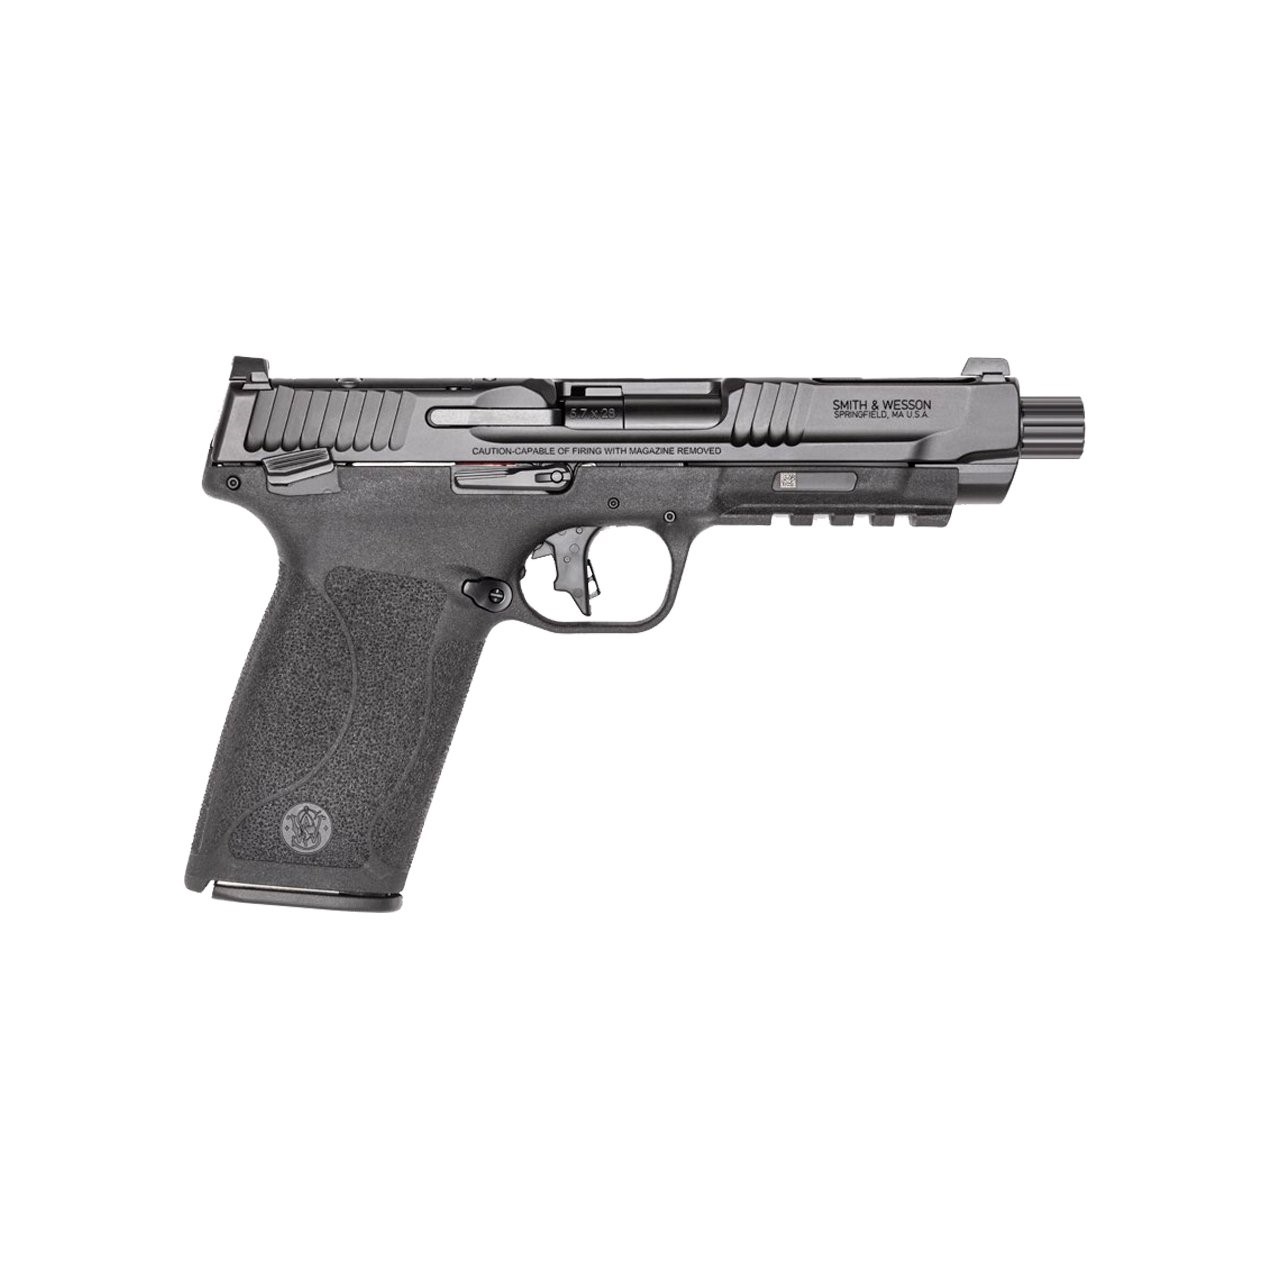 SMITH AND WESSON MP5.7, 5.7x28MM, 5" O/R, FLAT FACED TRIGGER, AMBI SAFETY & SLIDE STOP, 22RDS